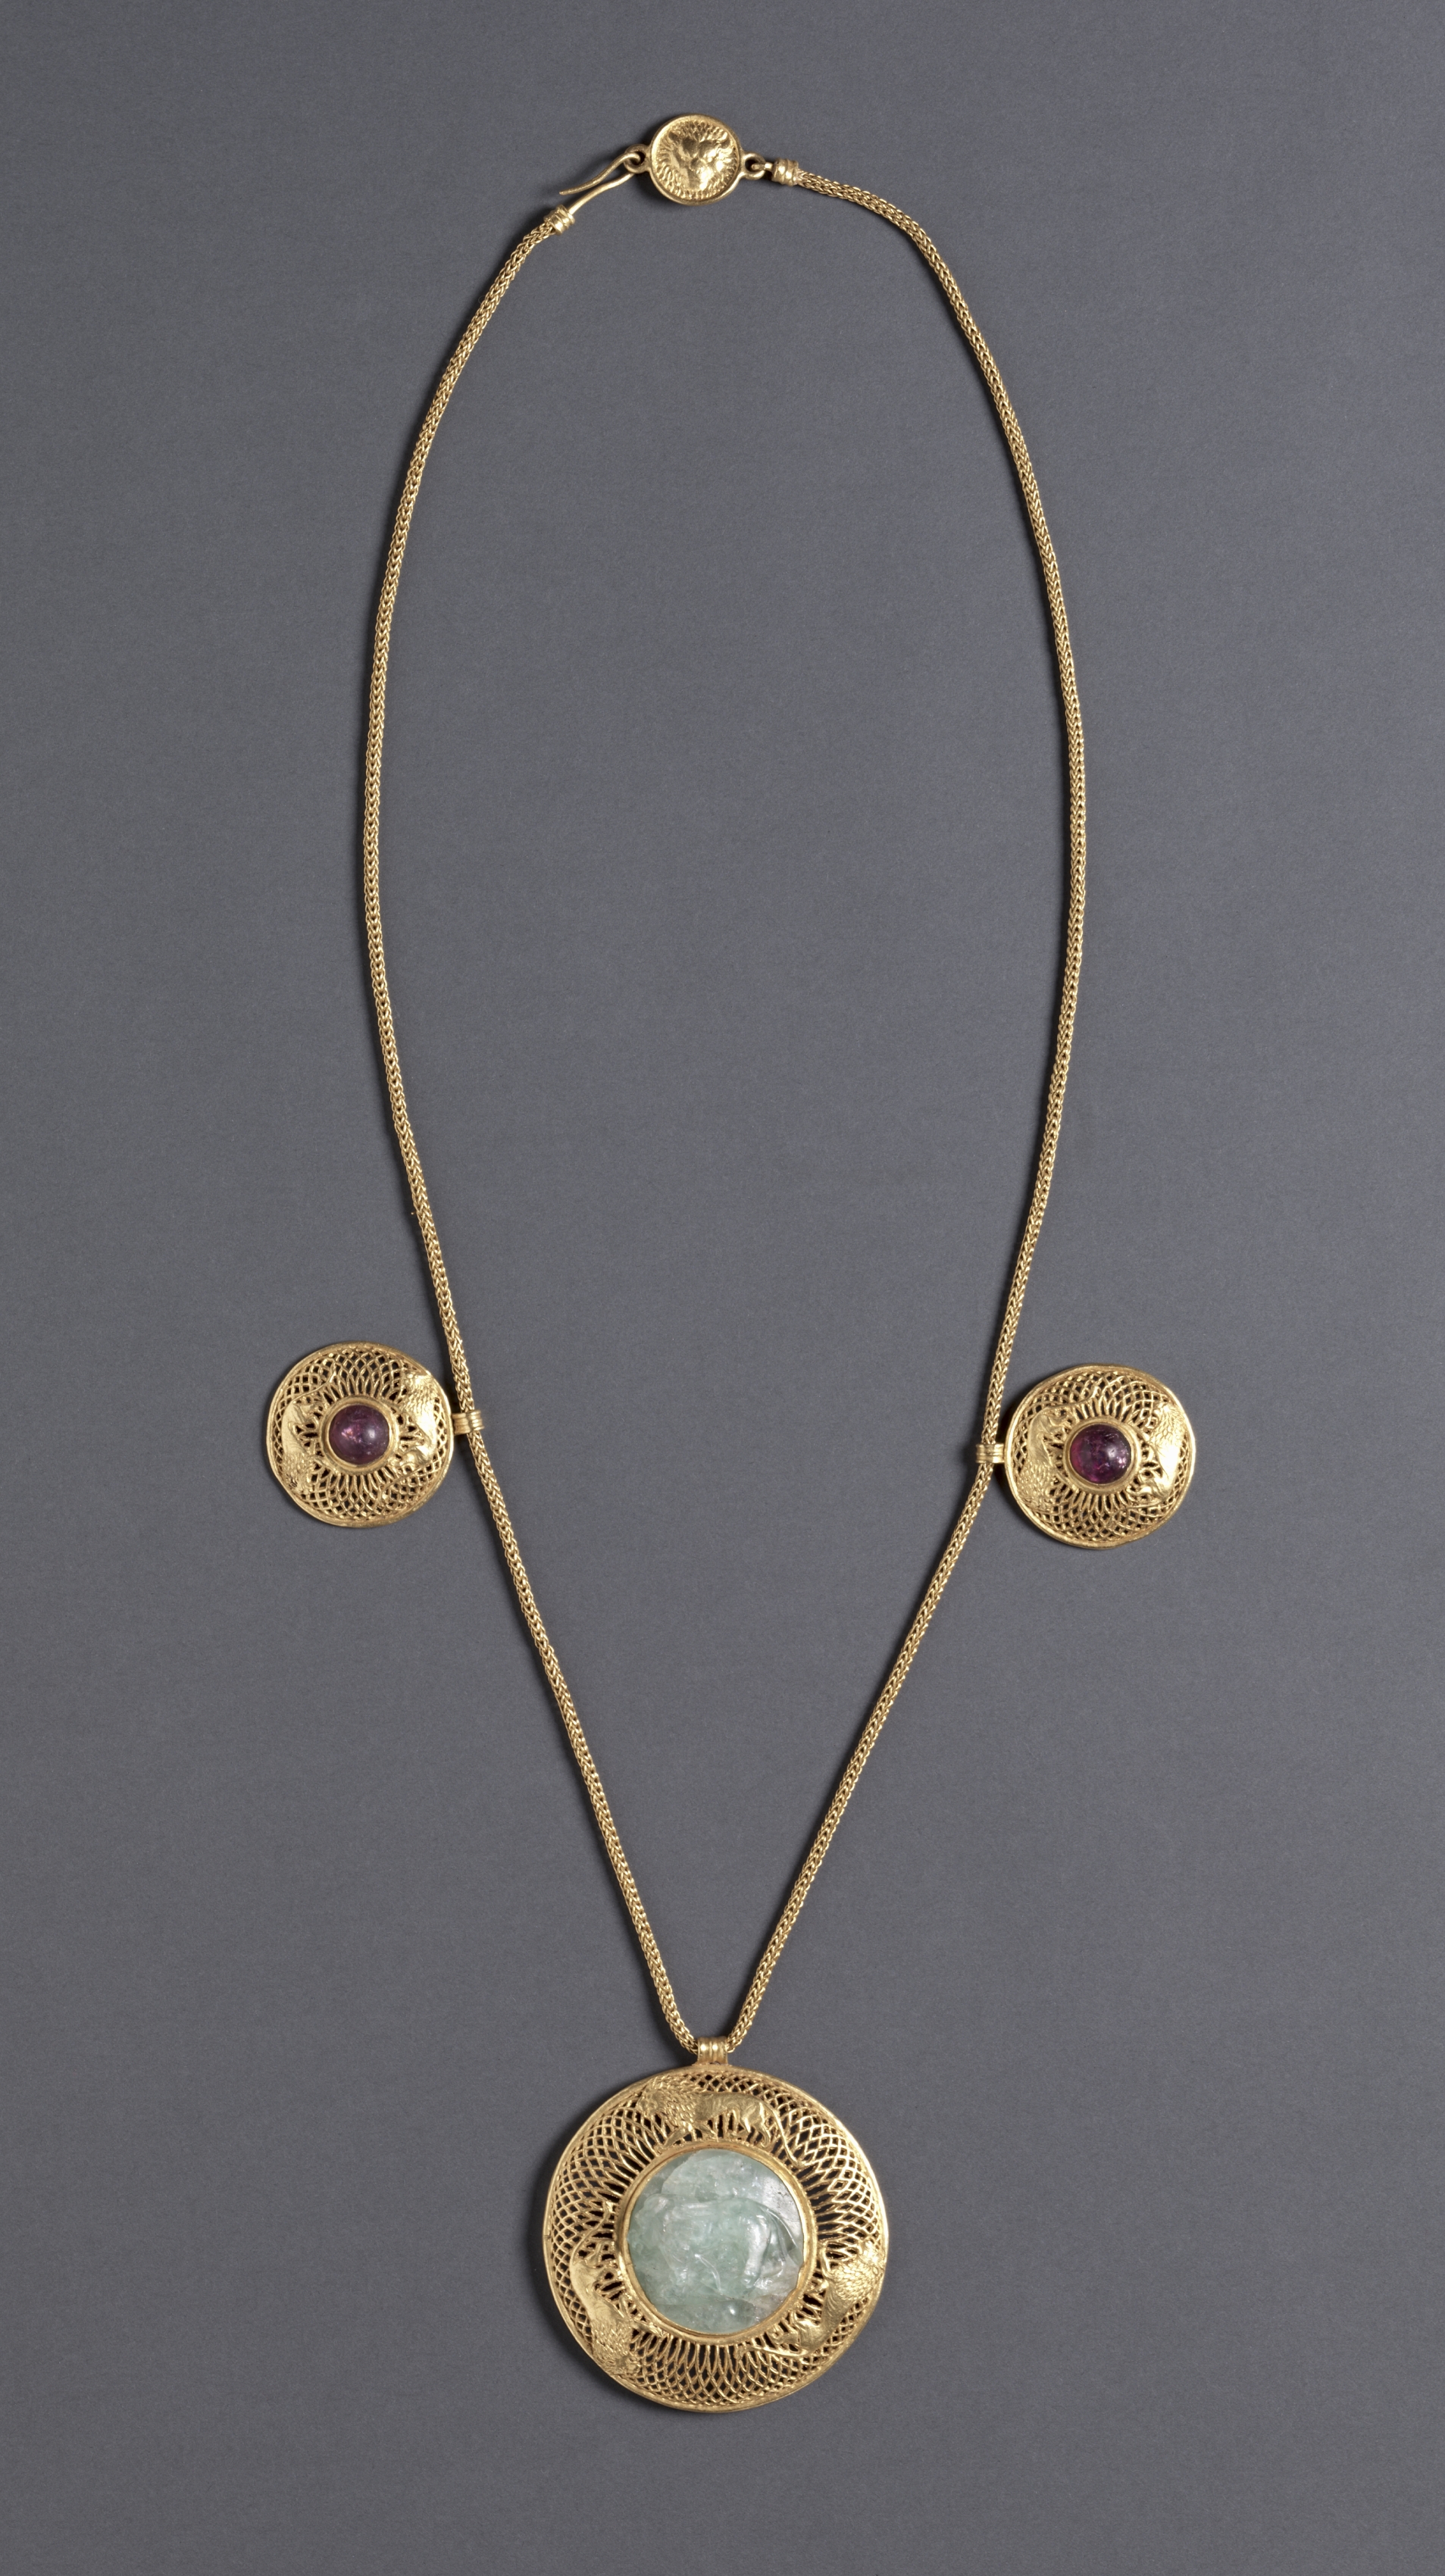 Necklace with Three Pendants